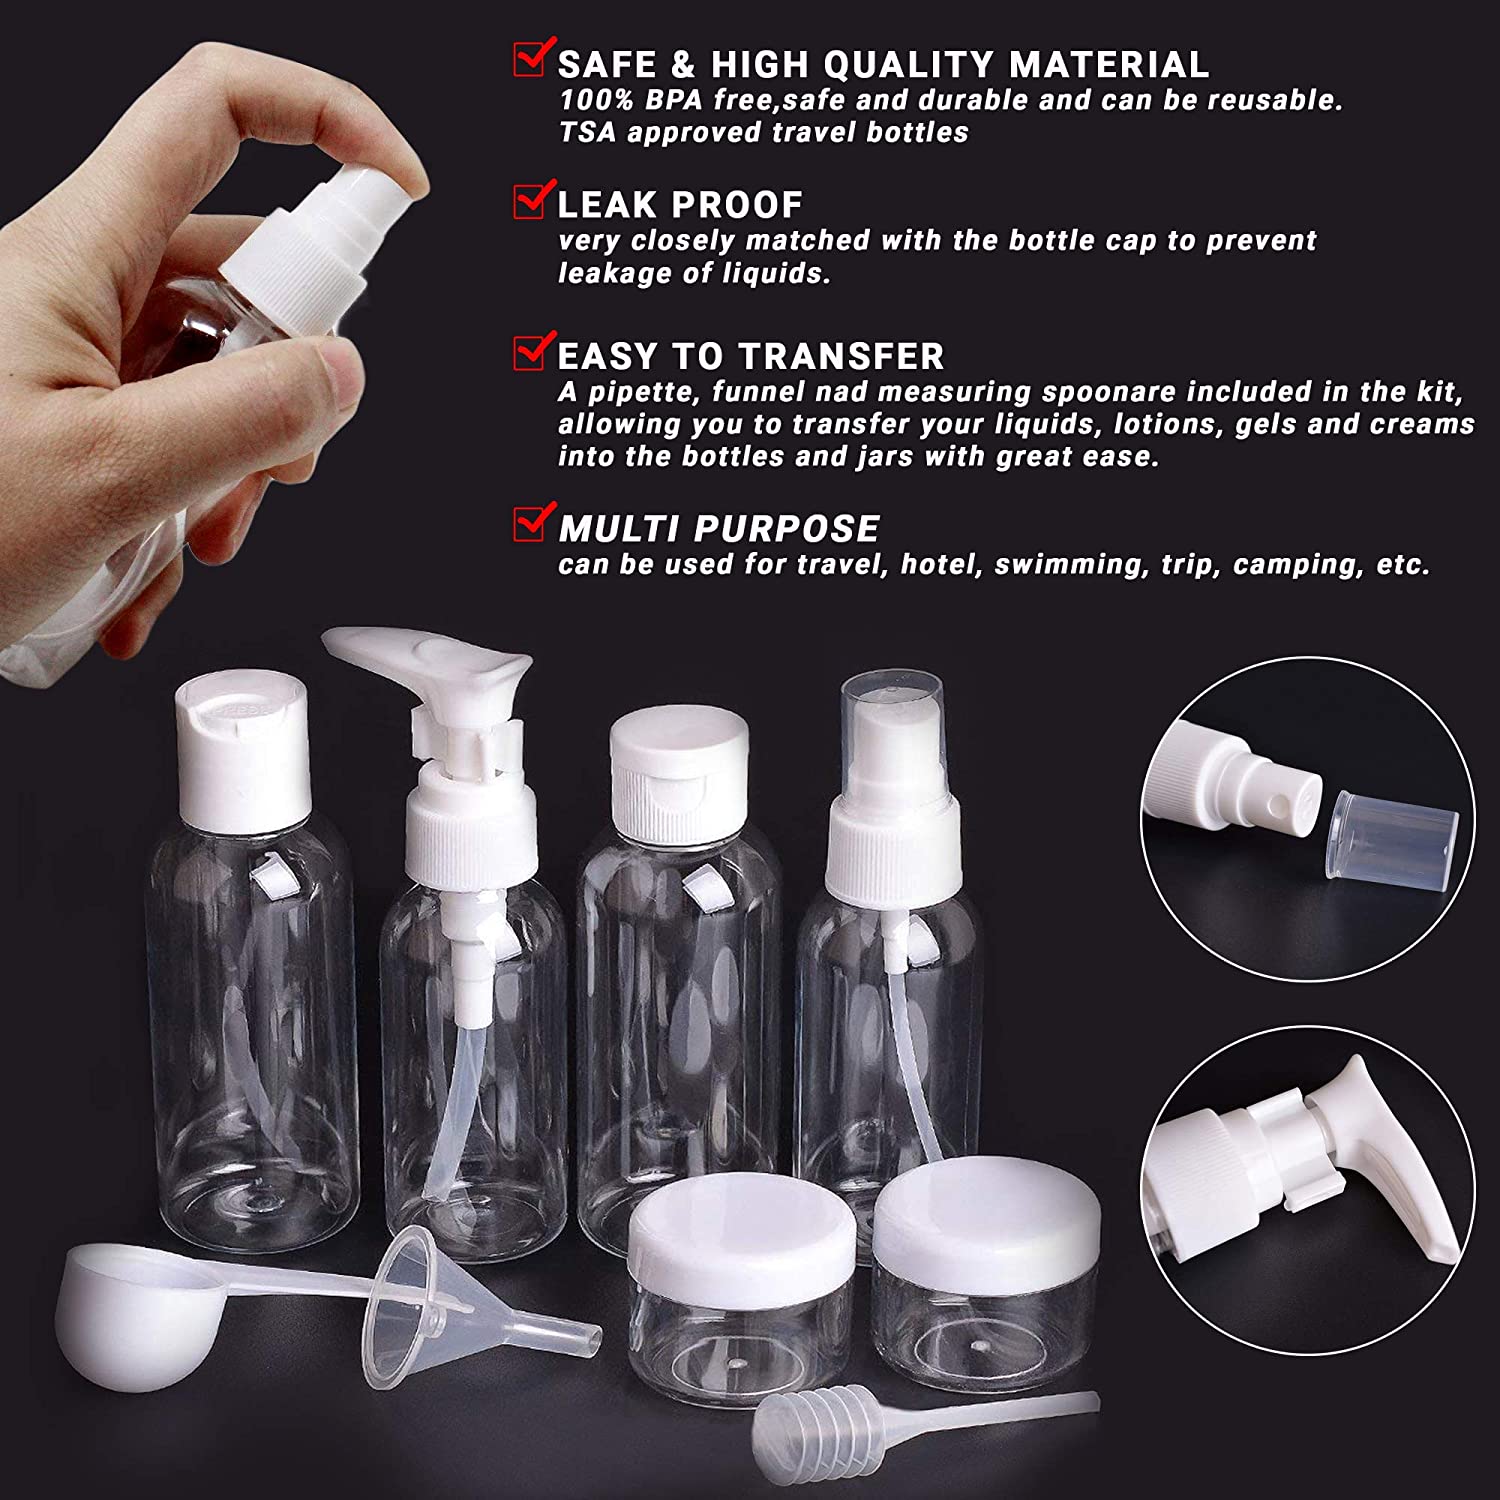 Travel Bottle Other Feature